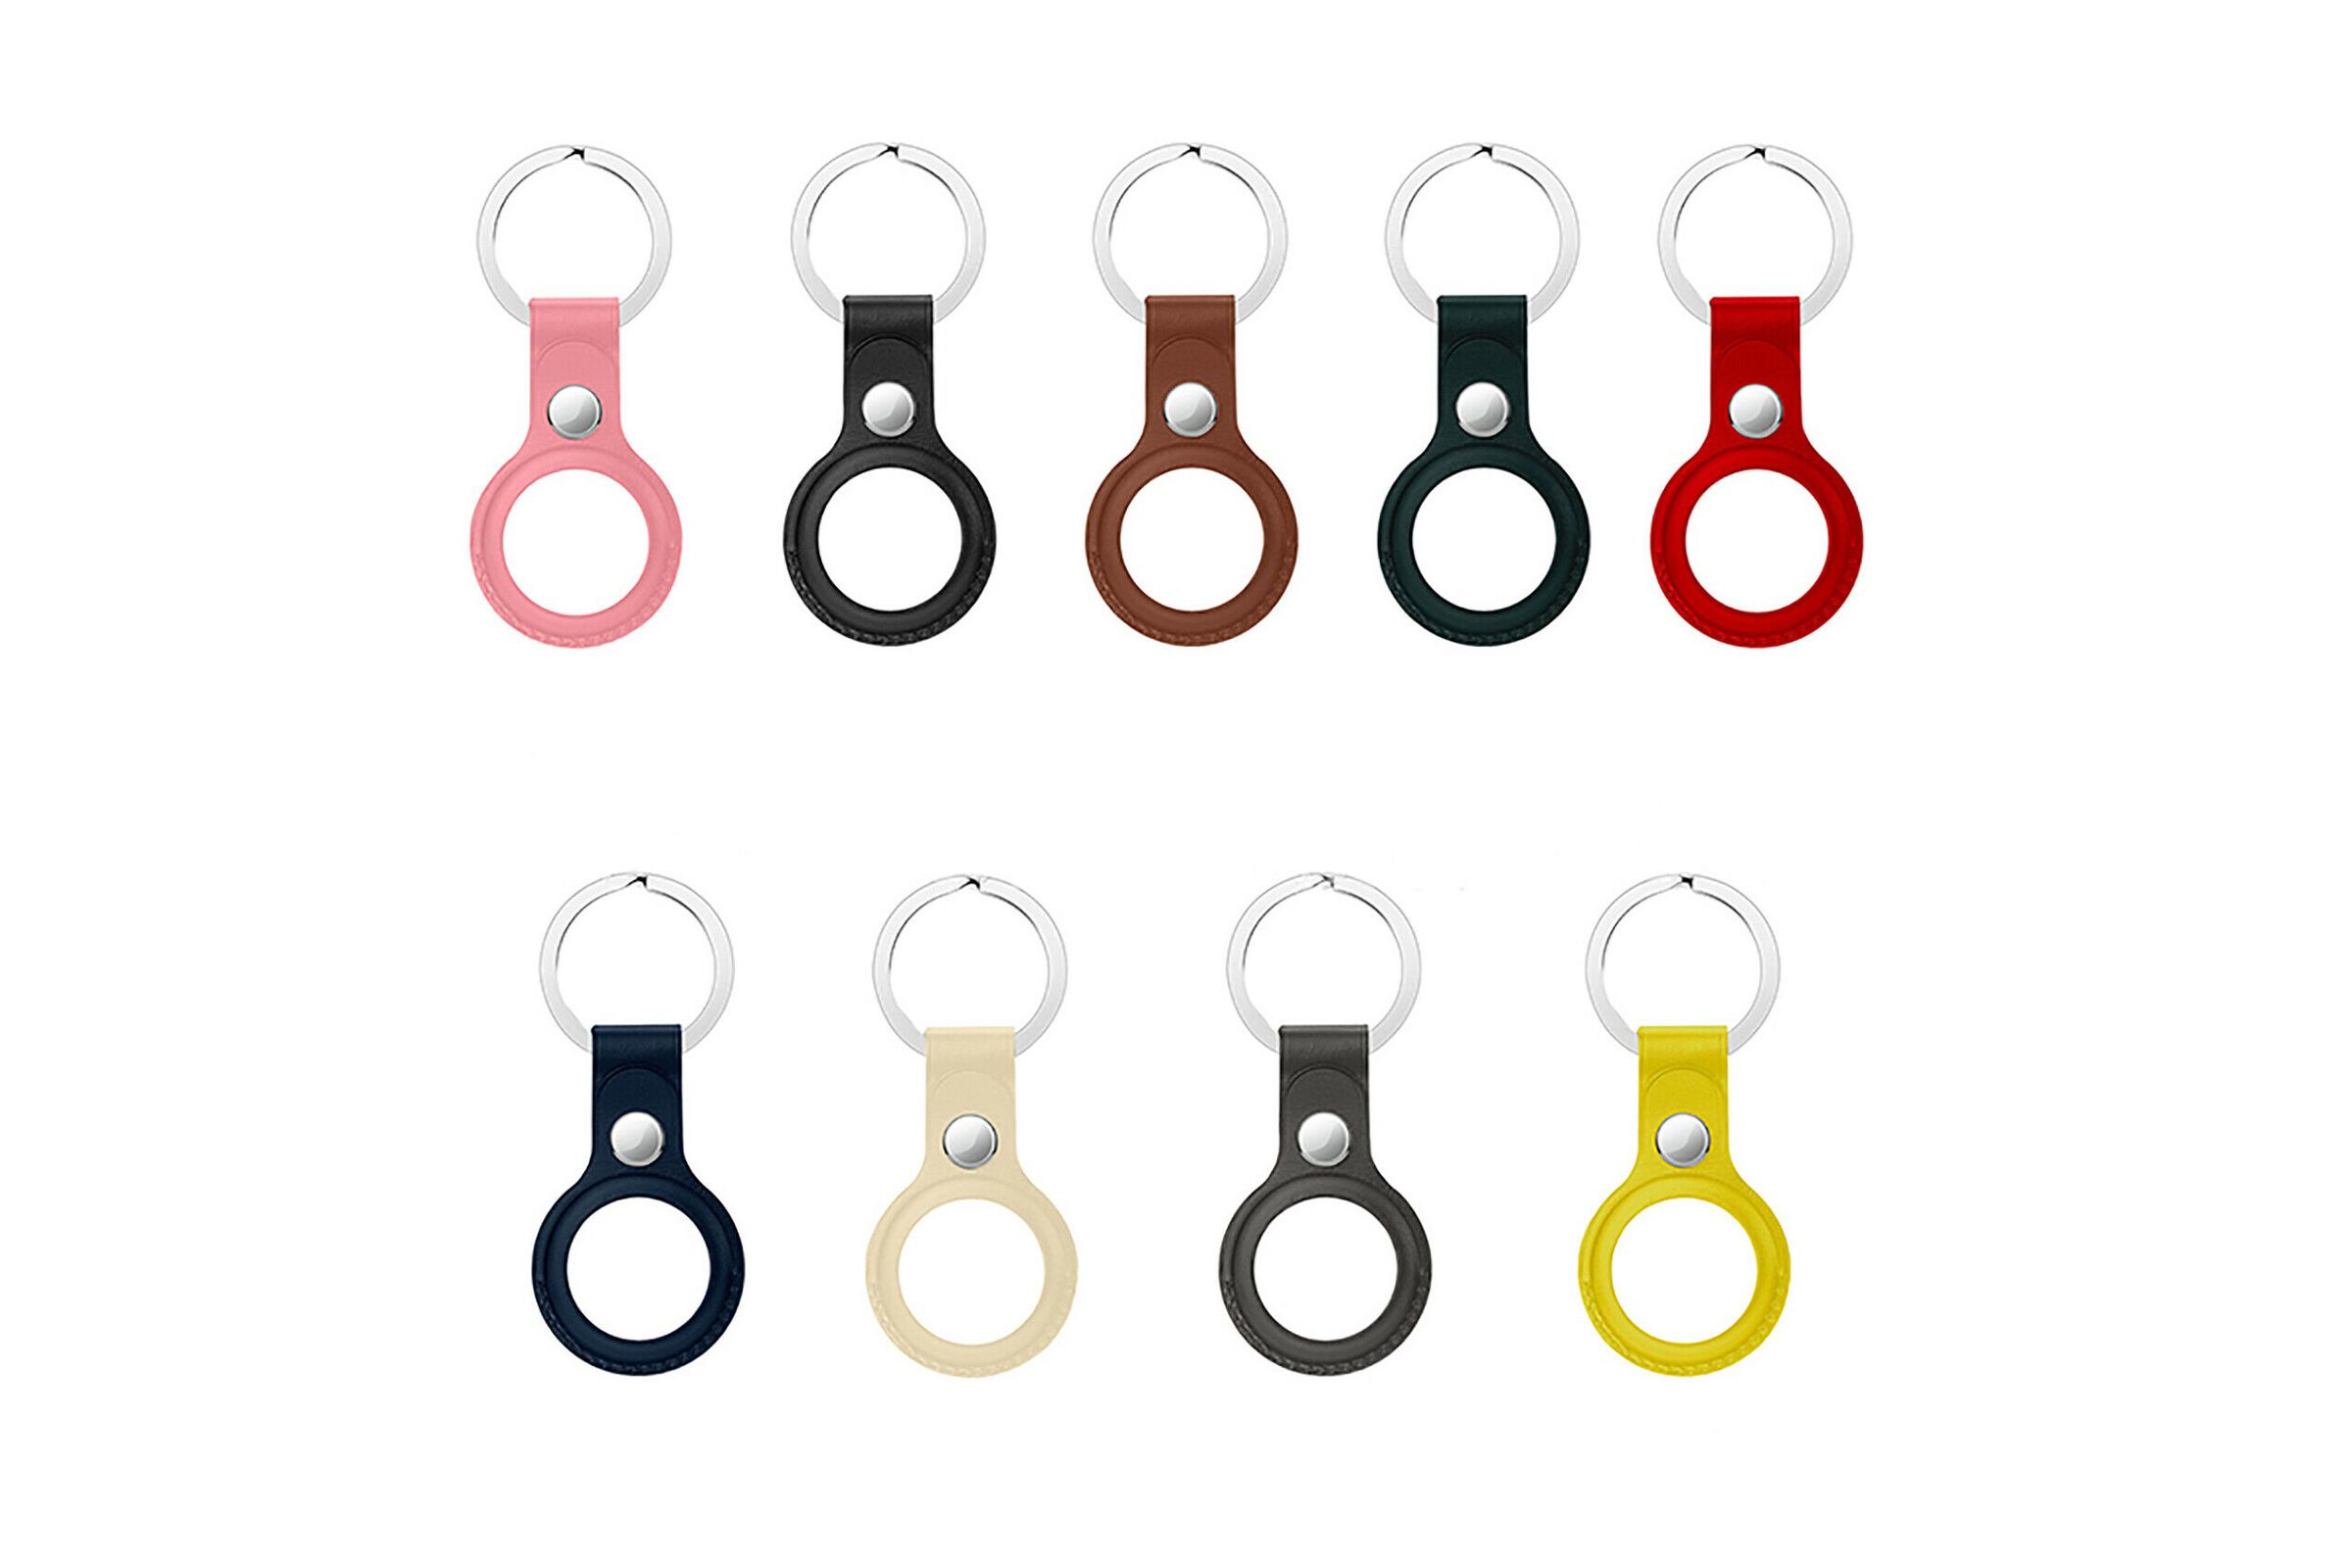 eBay listings show accessories to attach the trackers to a key chain.